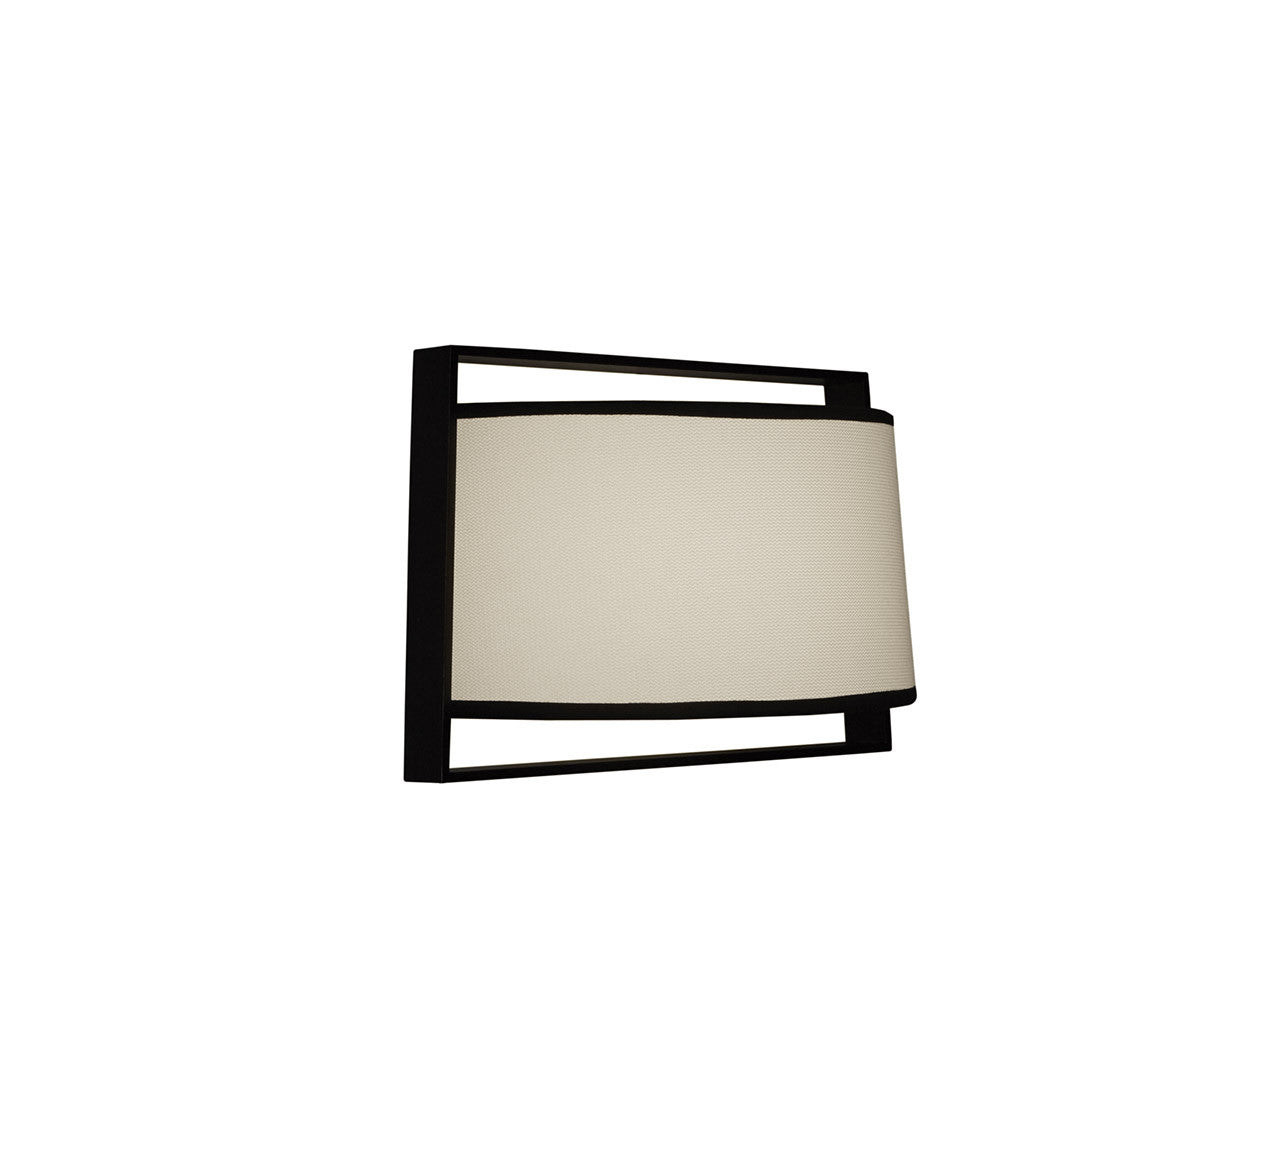 MACAO WALL LAMP 551.44 BY TOOY $548.00